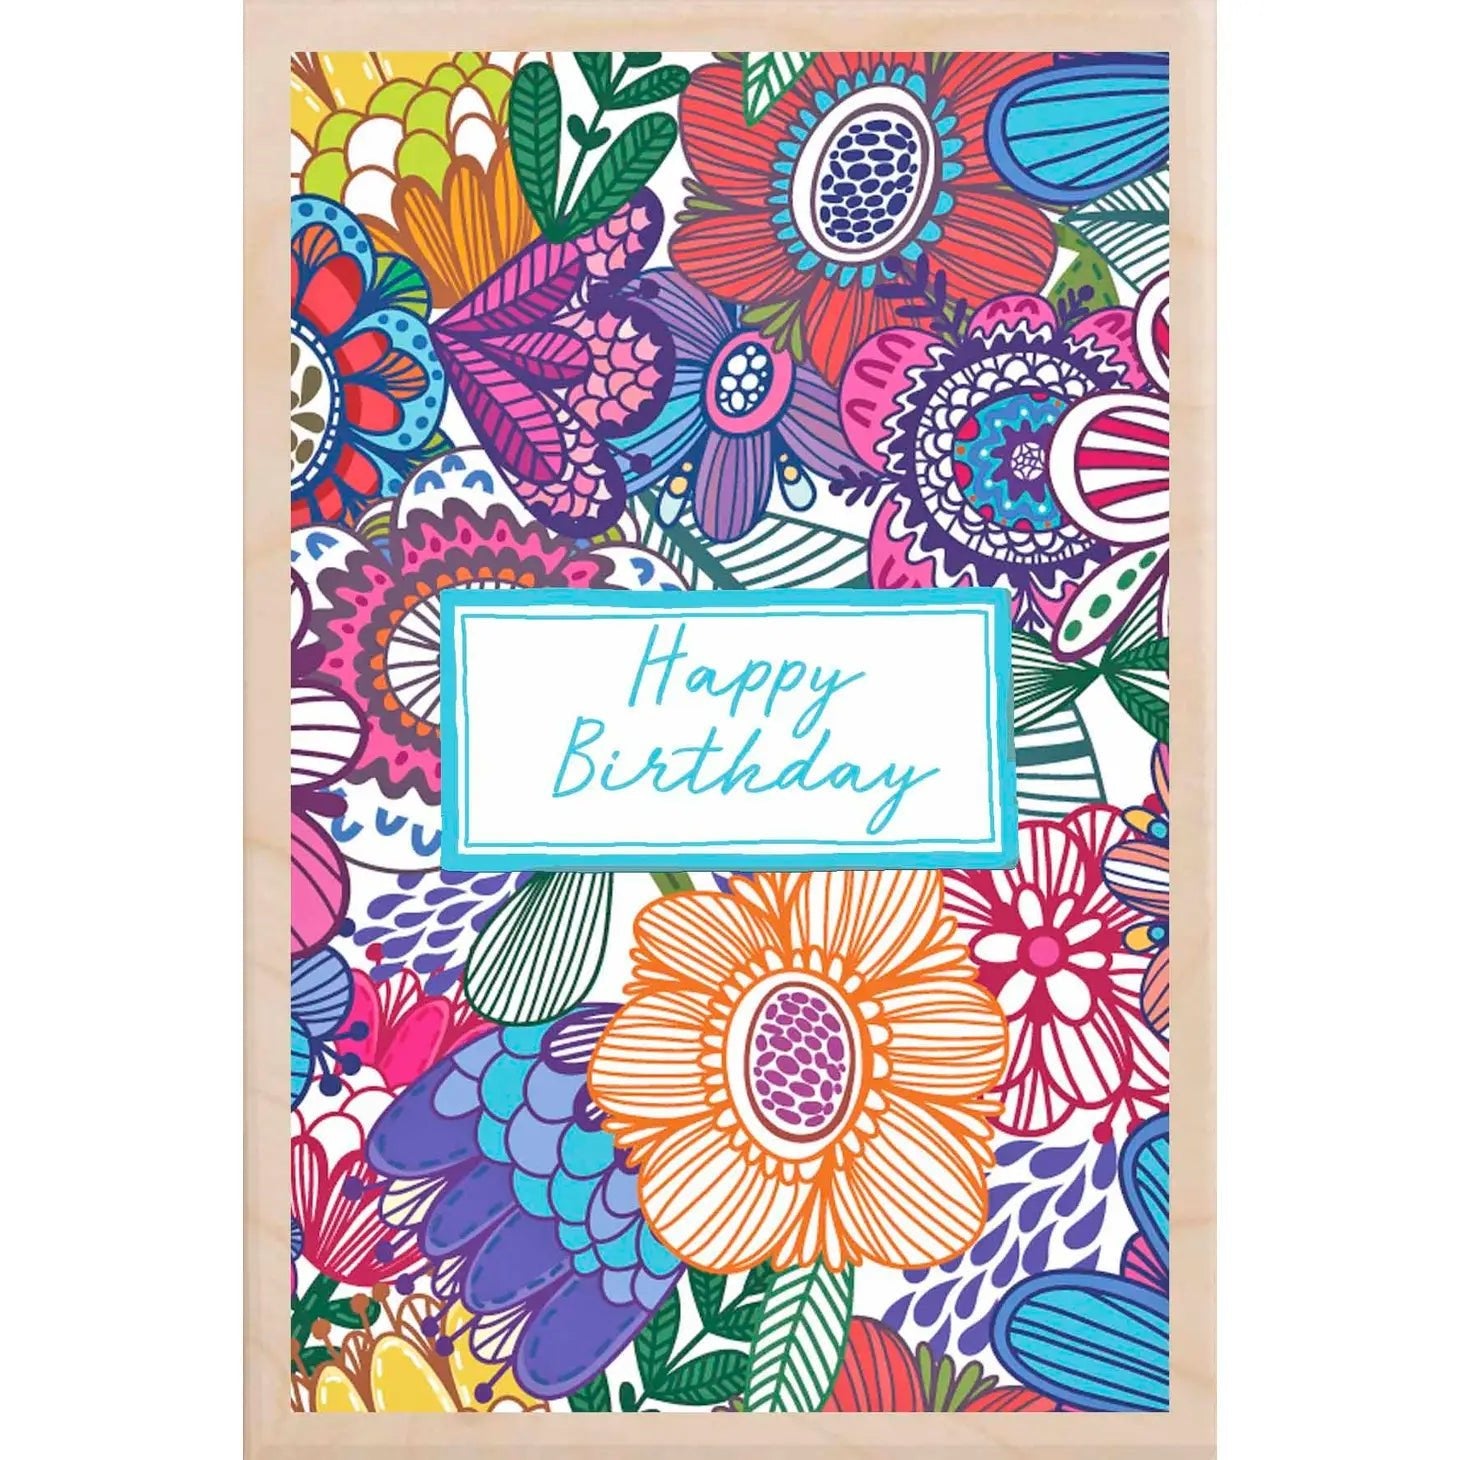 HAPPY BIRTHDAY FLOWERS wooden postcard (Greeting Card) - WP12 - The Hare and the Moon